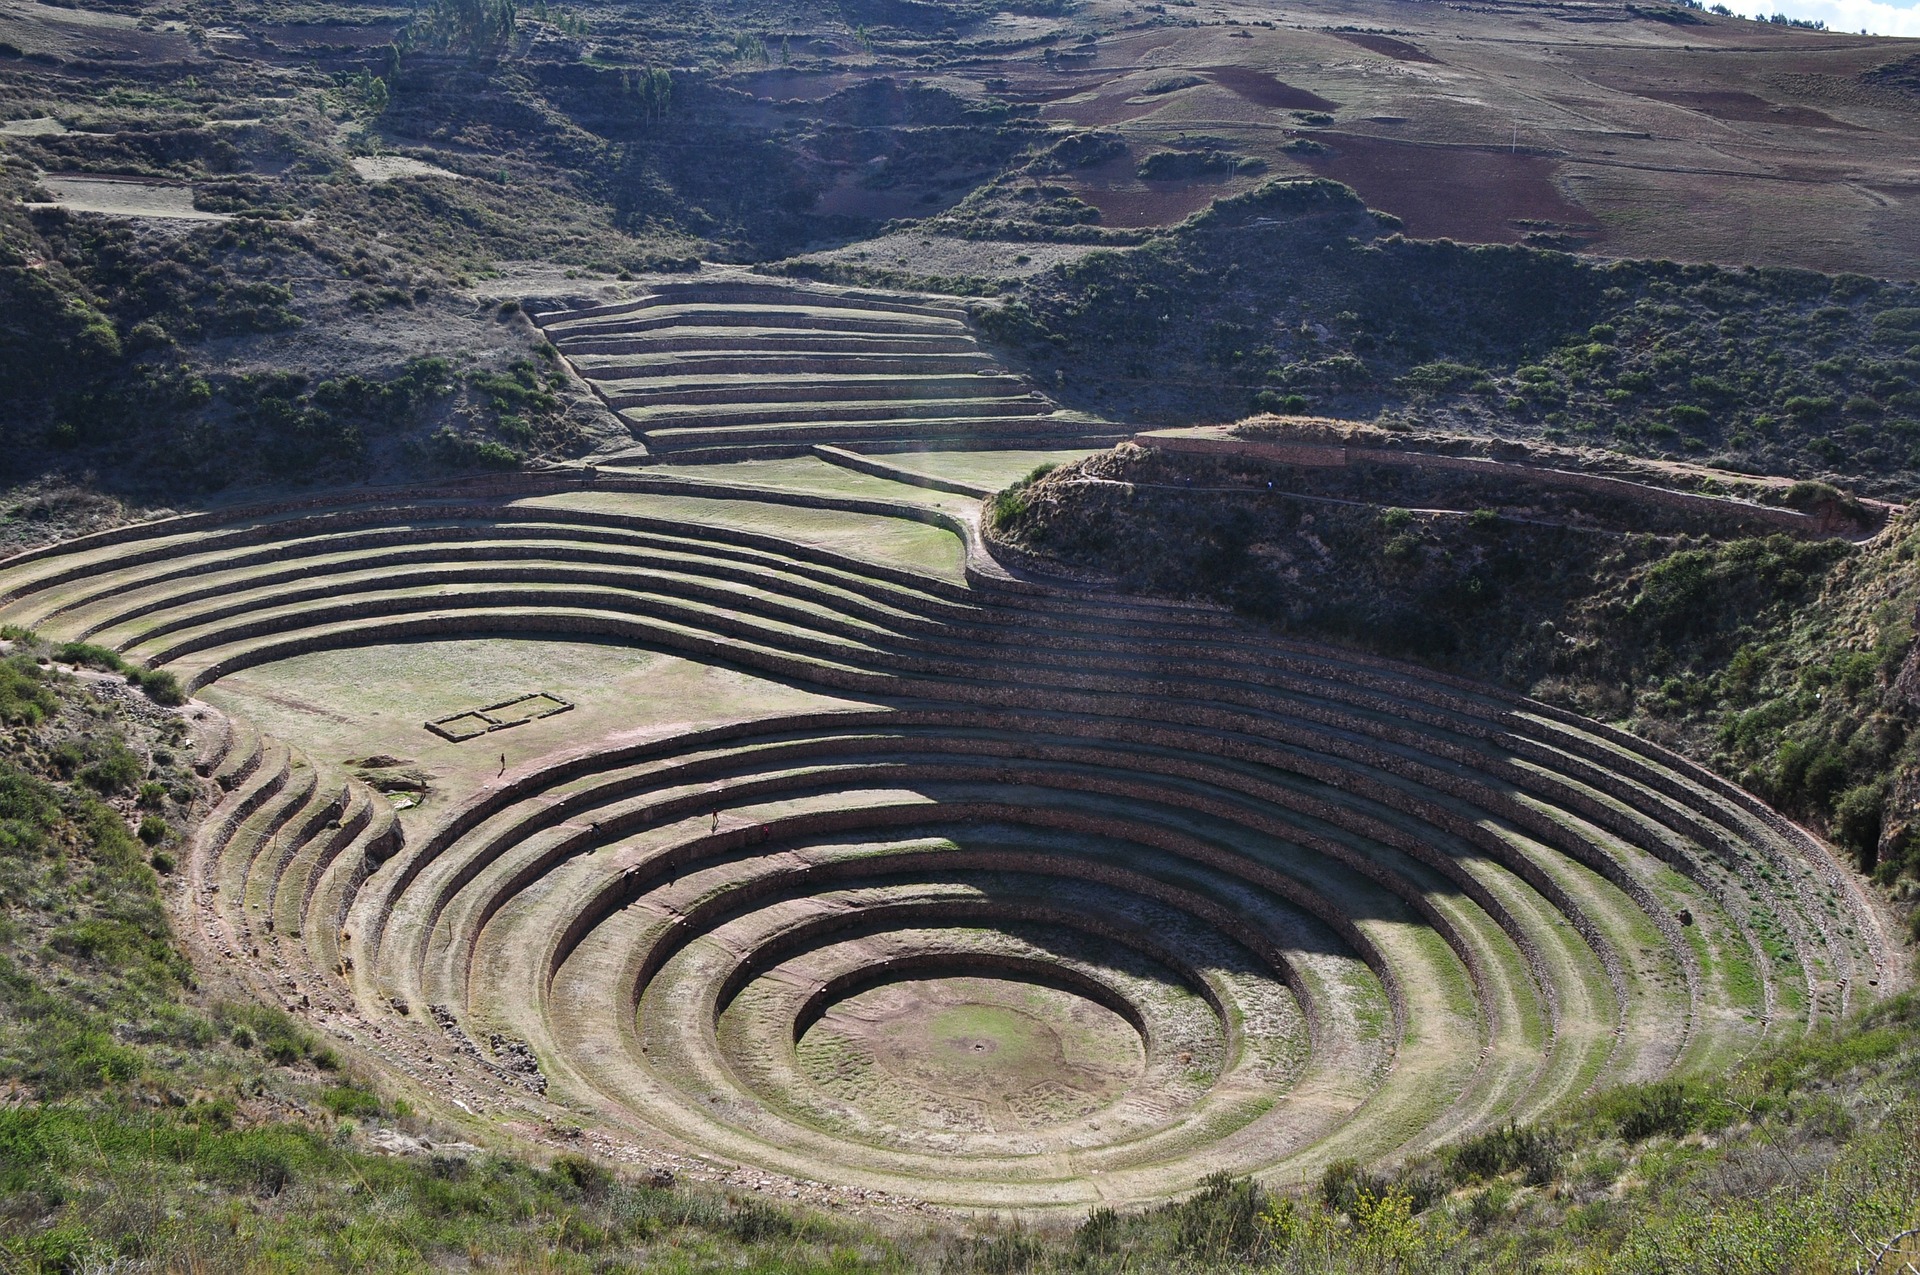 The Sacred Valley – Land of the Incas